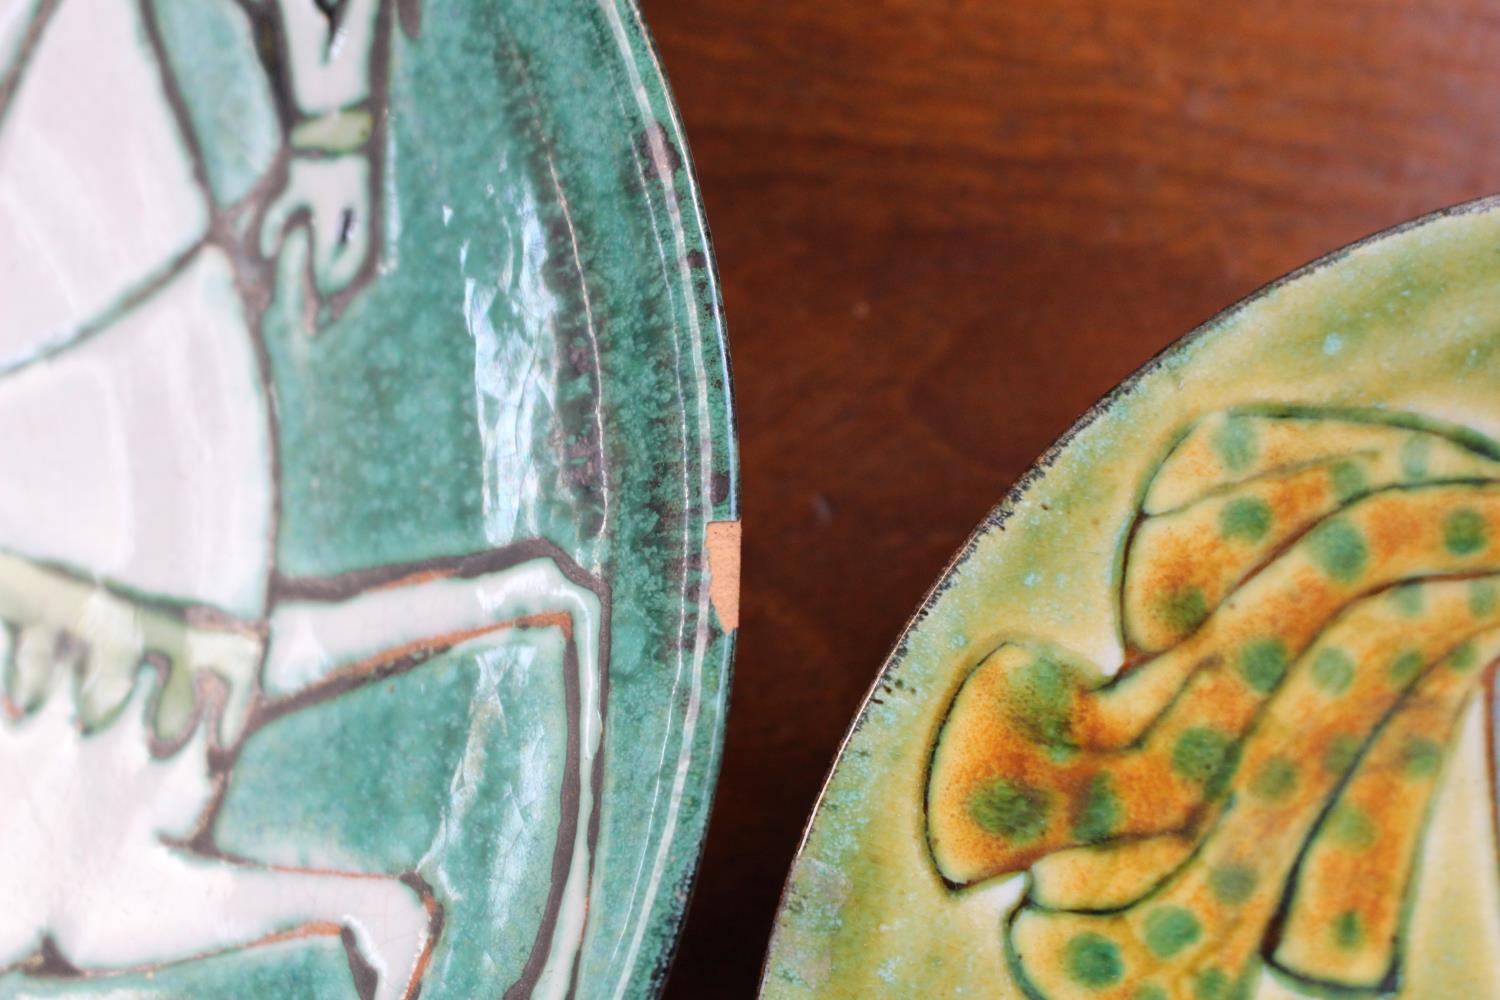 2 Chelsea Pottery Bowls with Horse back rider decoration on green ground glaze - Image 2 of 3